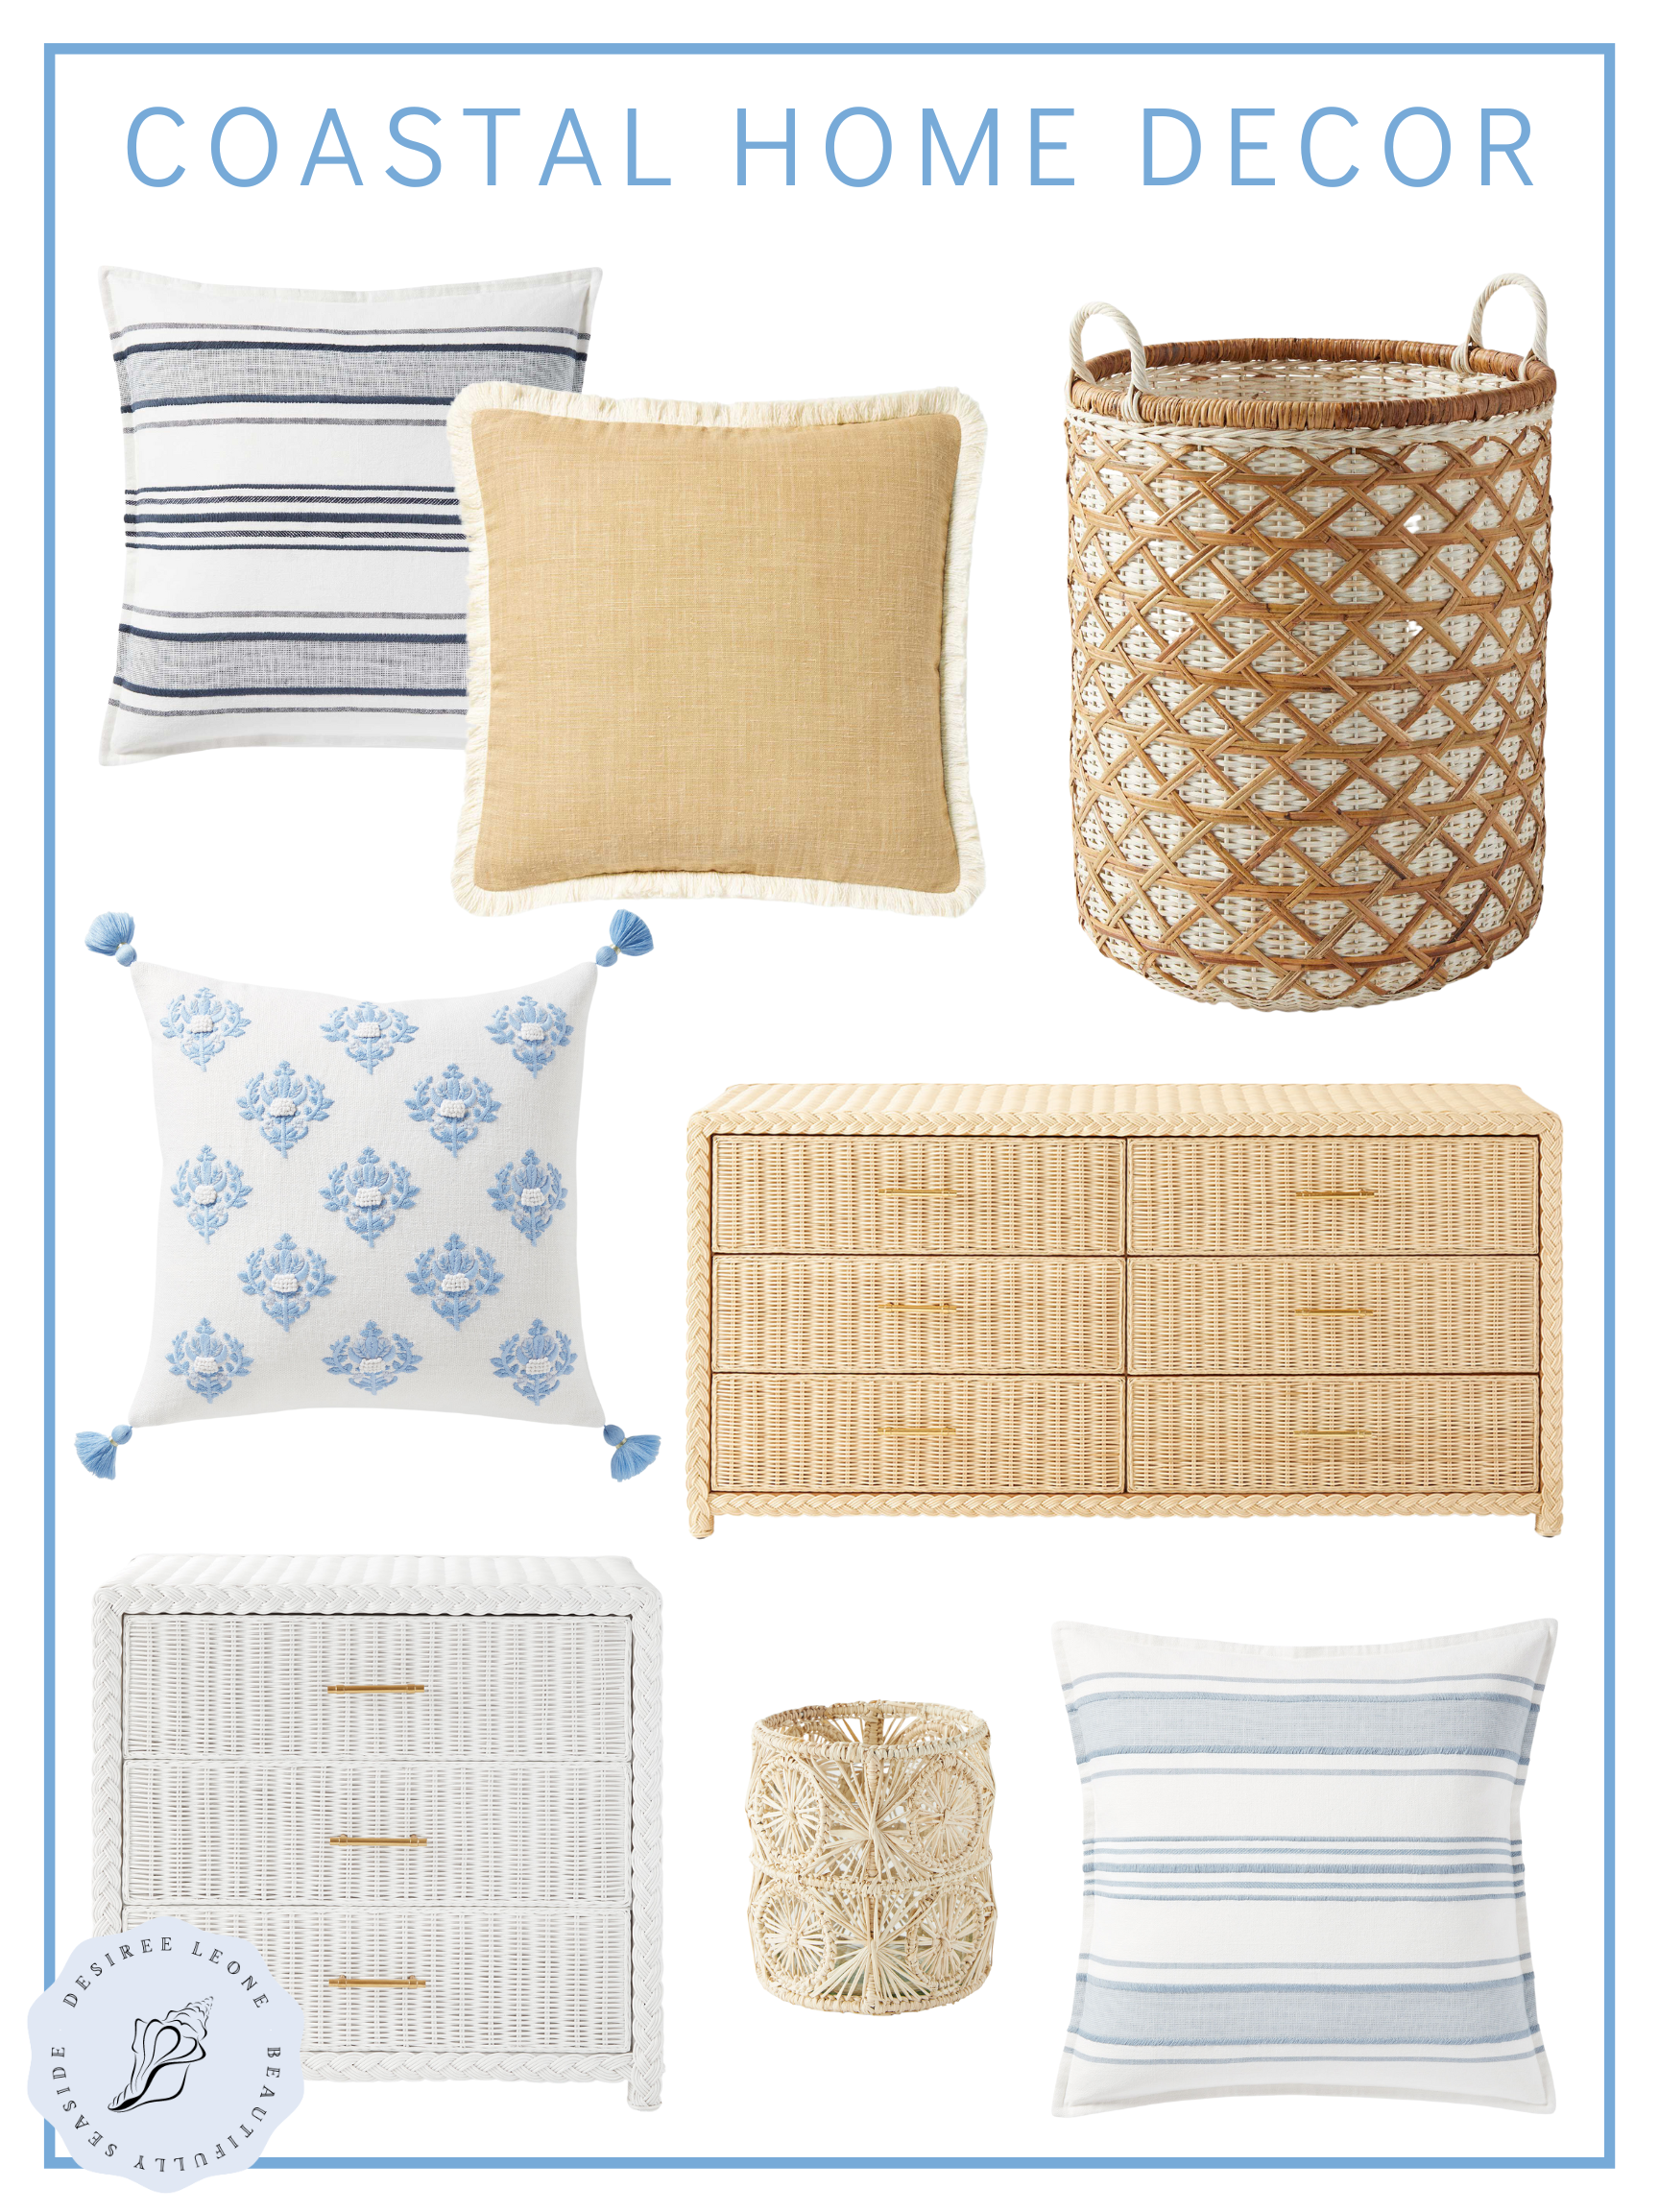 Desiree Leone of Beautifully Seaside features over 150 new arrivals in coastal home decor for spring and everything is on sale!